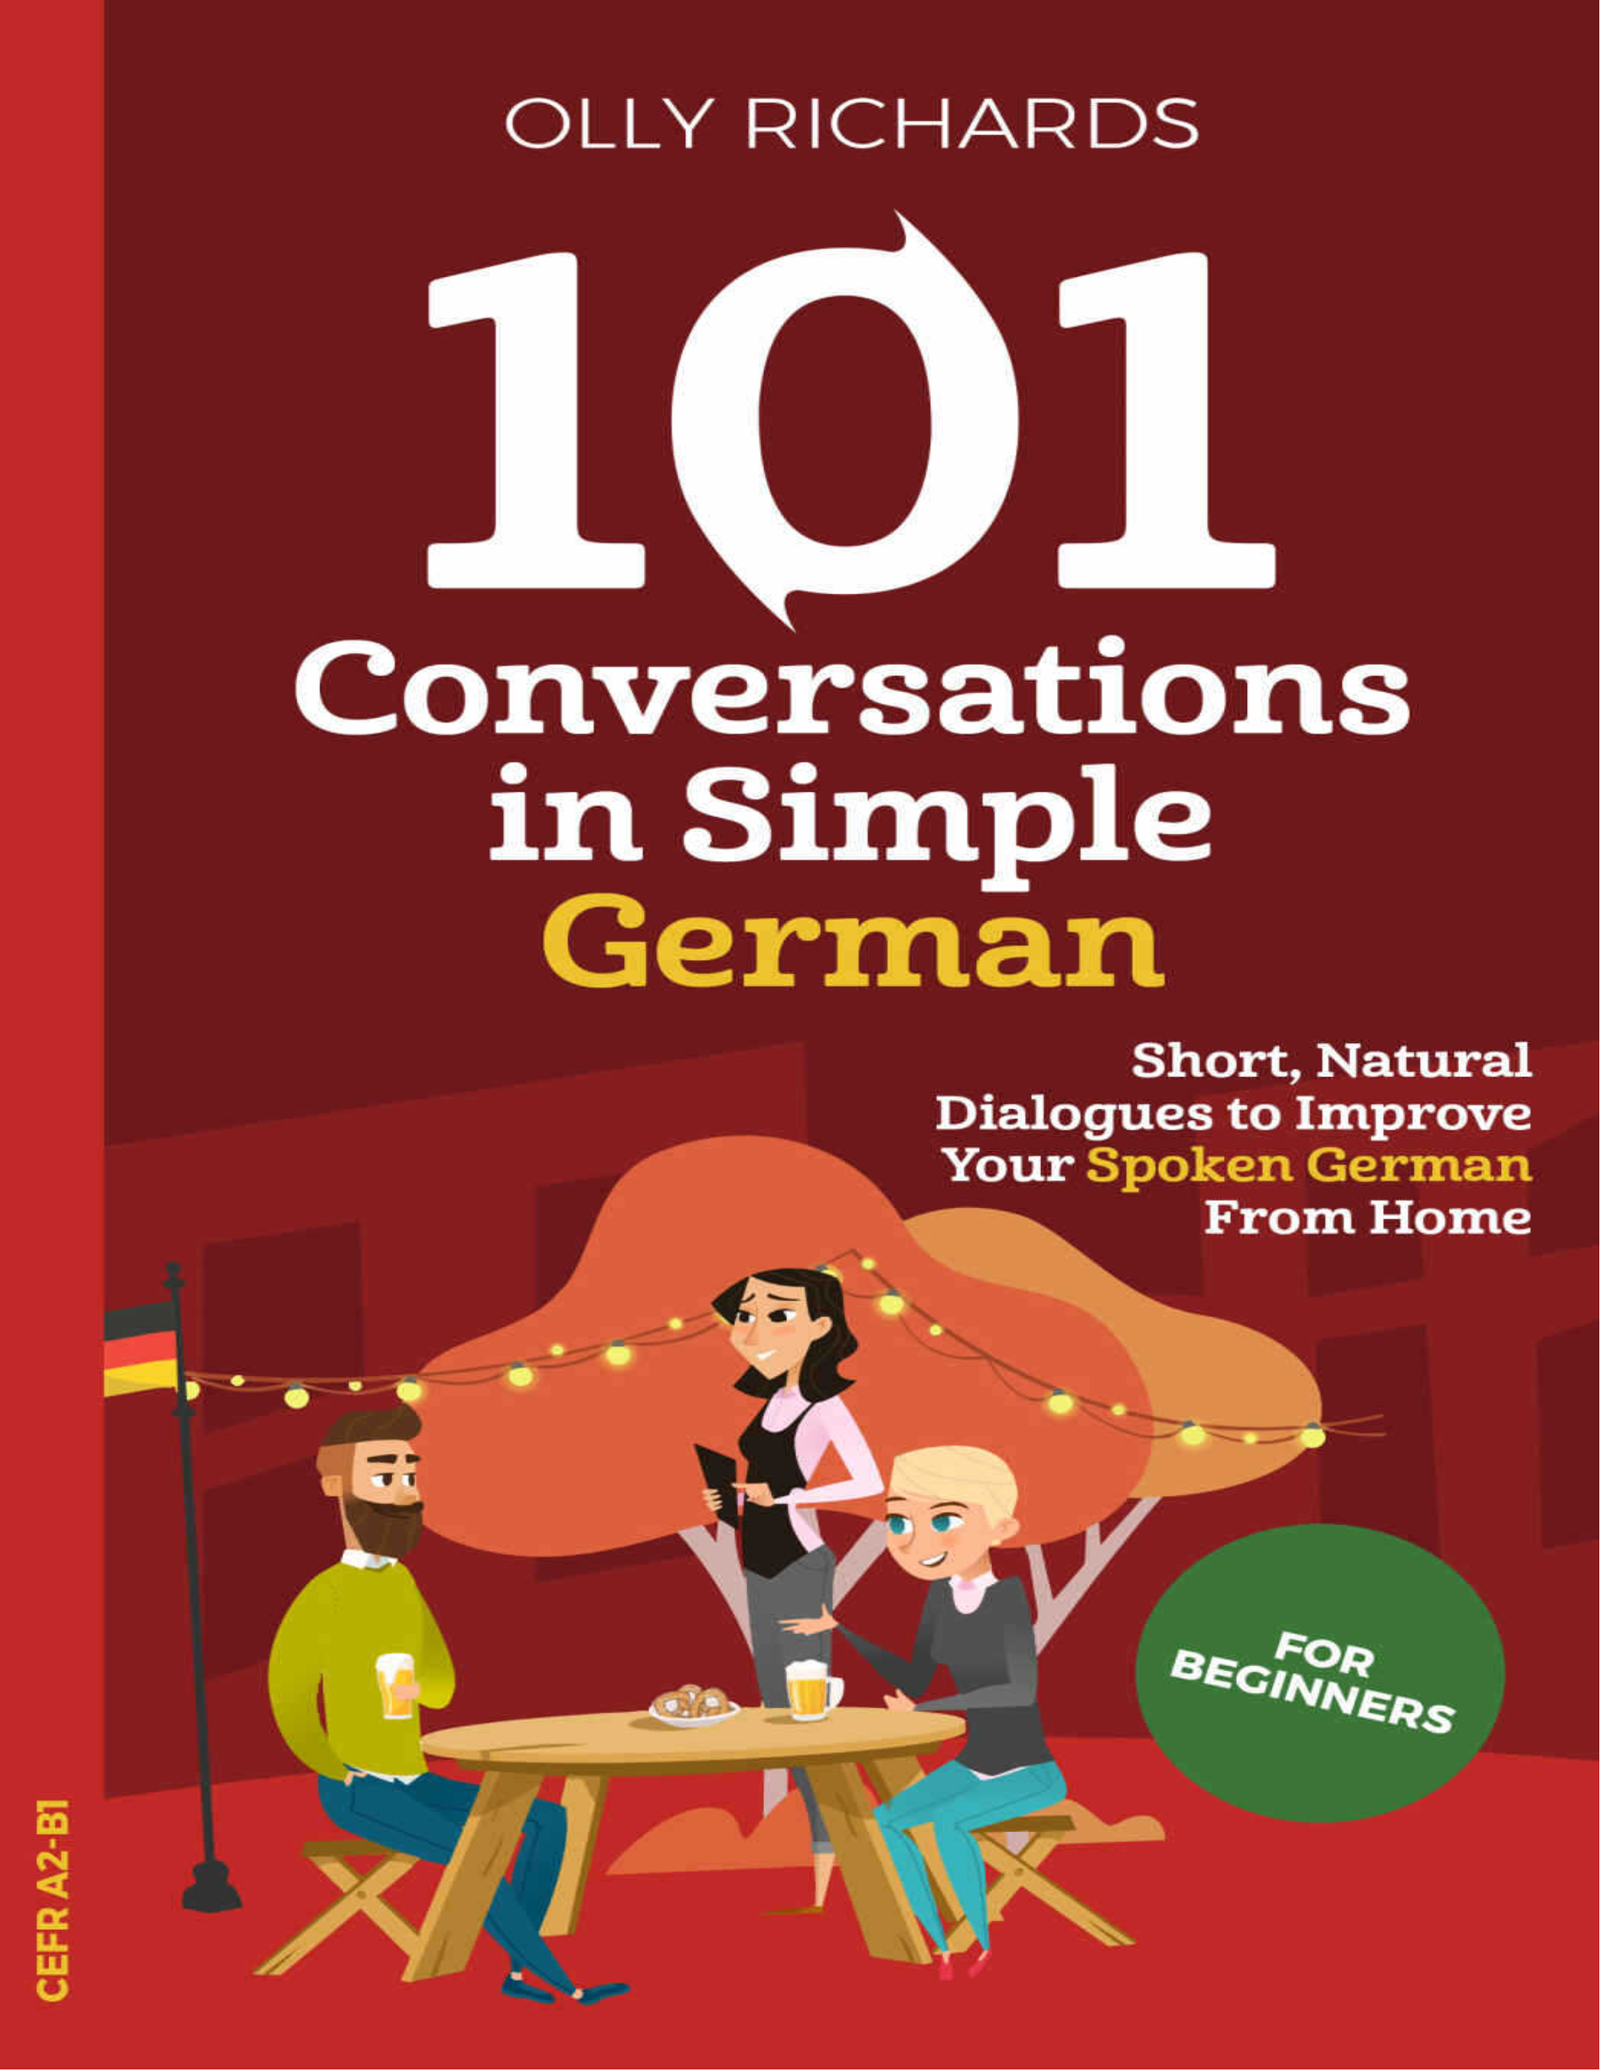 Rich Results on Google's SERP when searching for ''101 Conversations in Simple German''